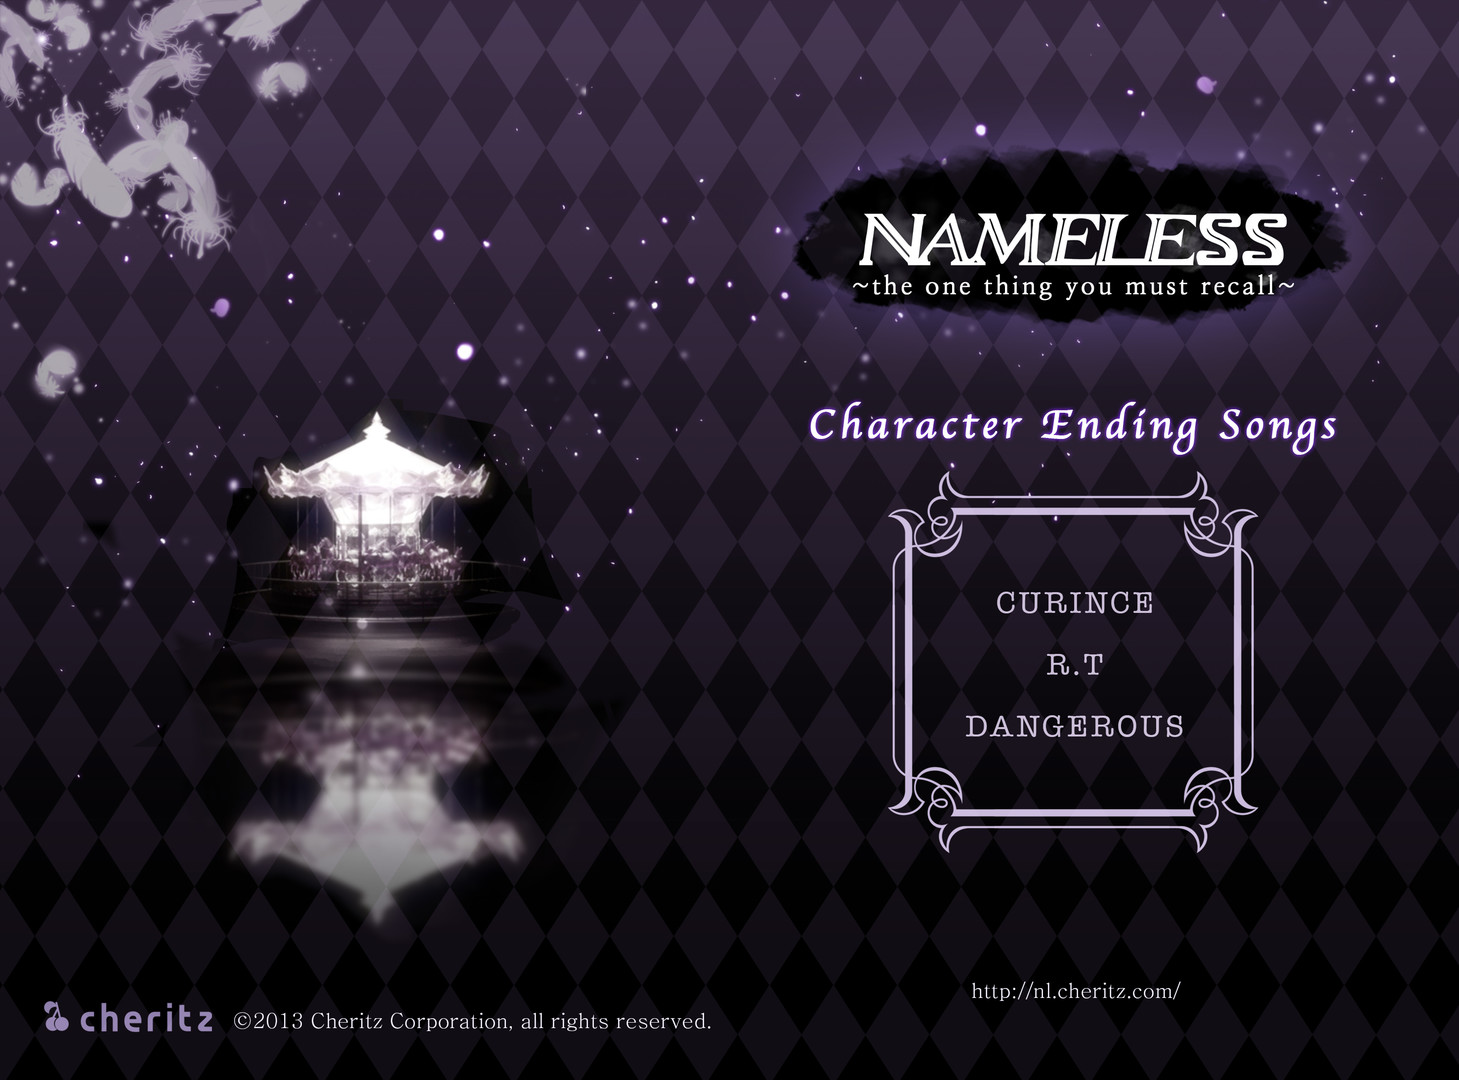 Nameless ~the one thing you must recall~ Character Ending Songs Featured Screenshot #1